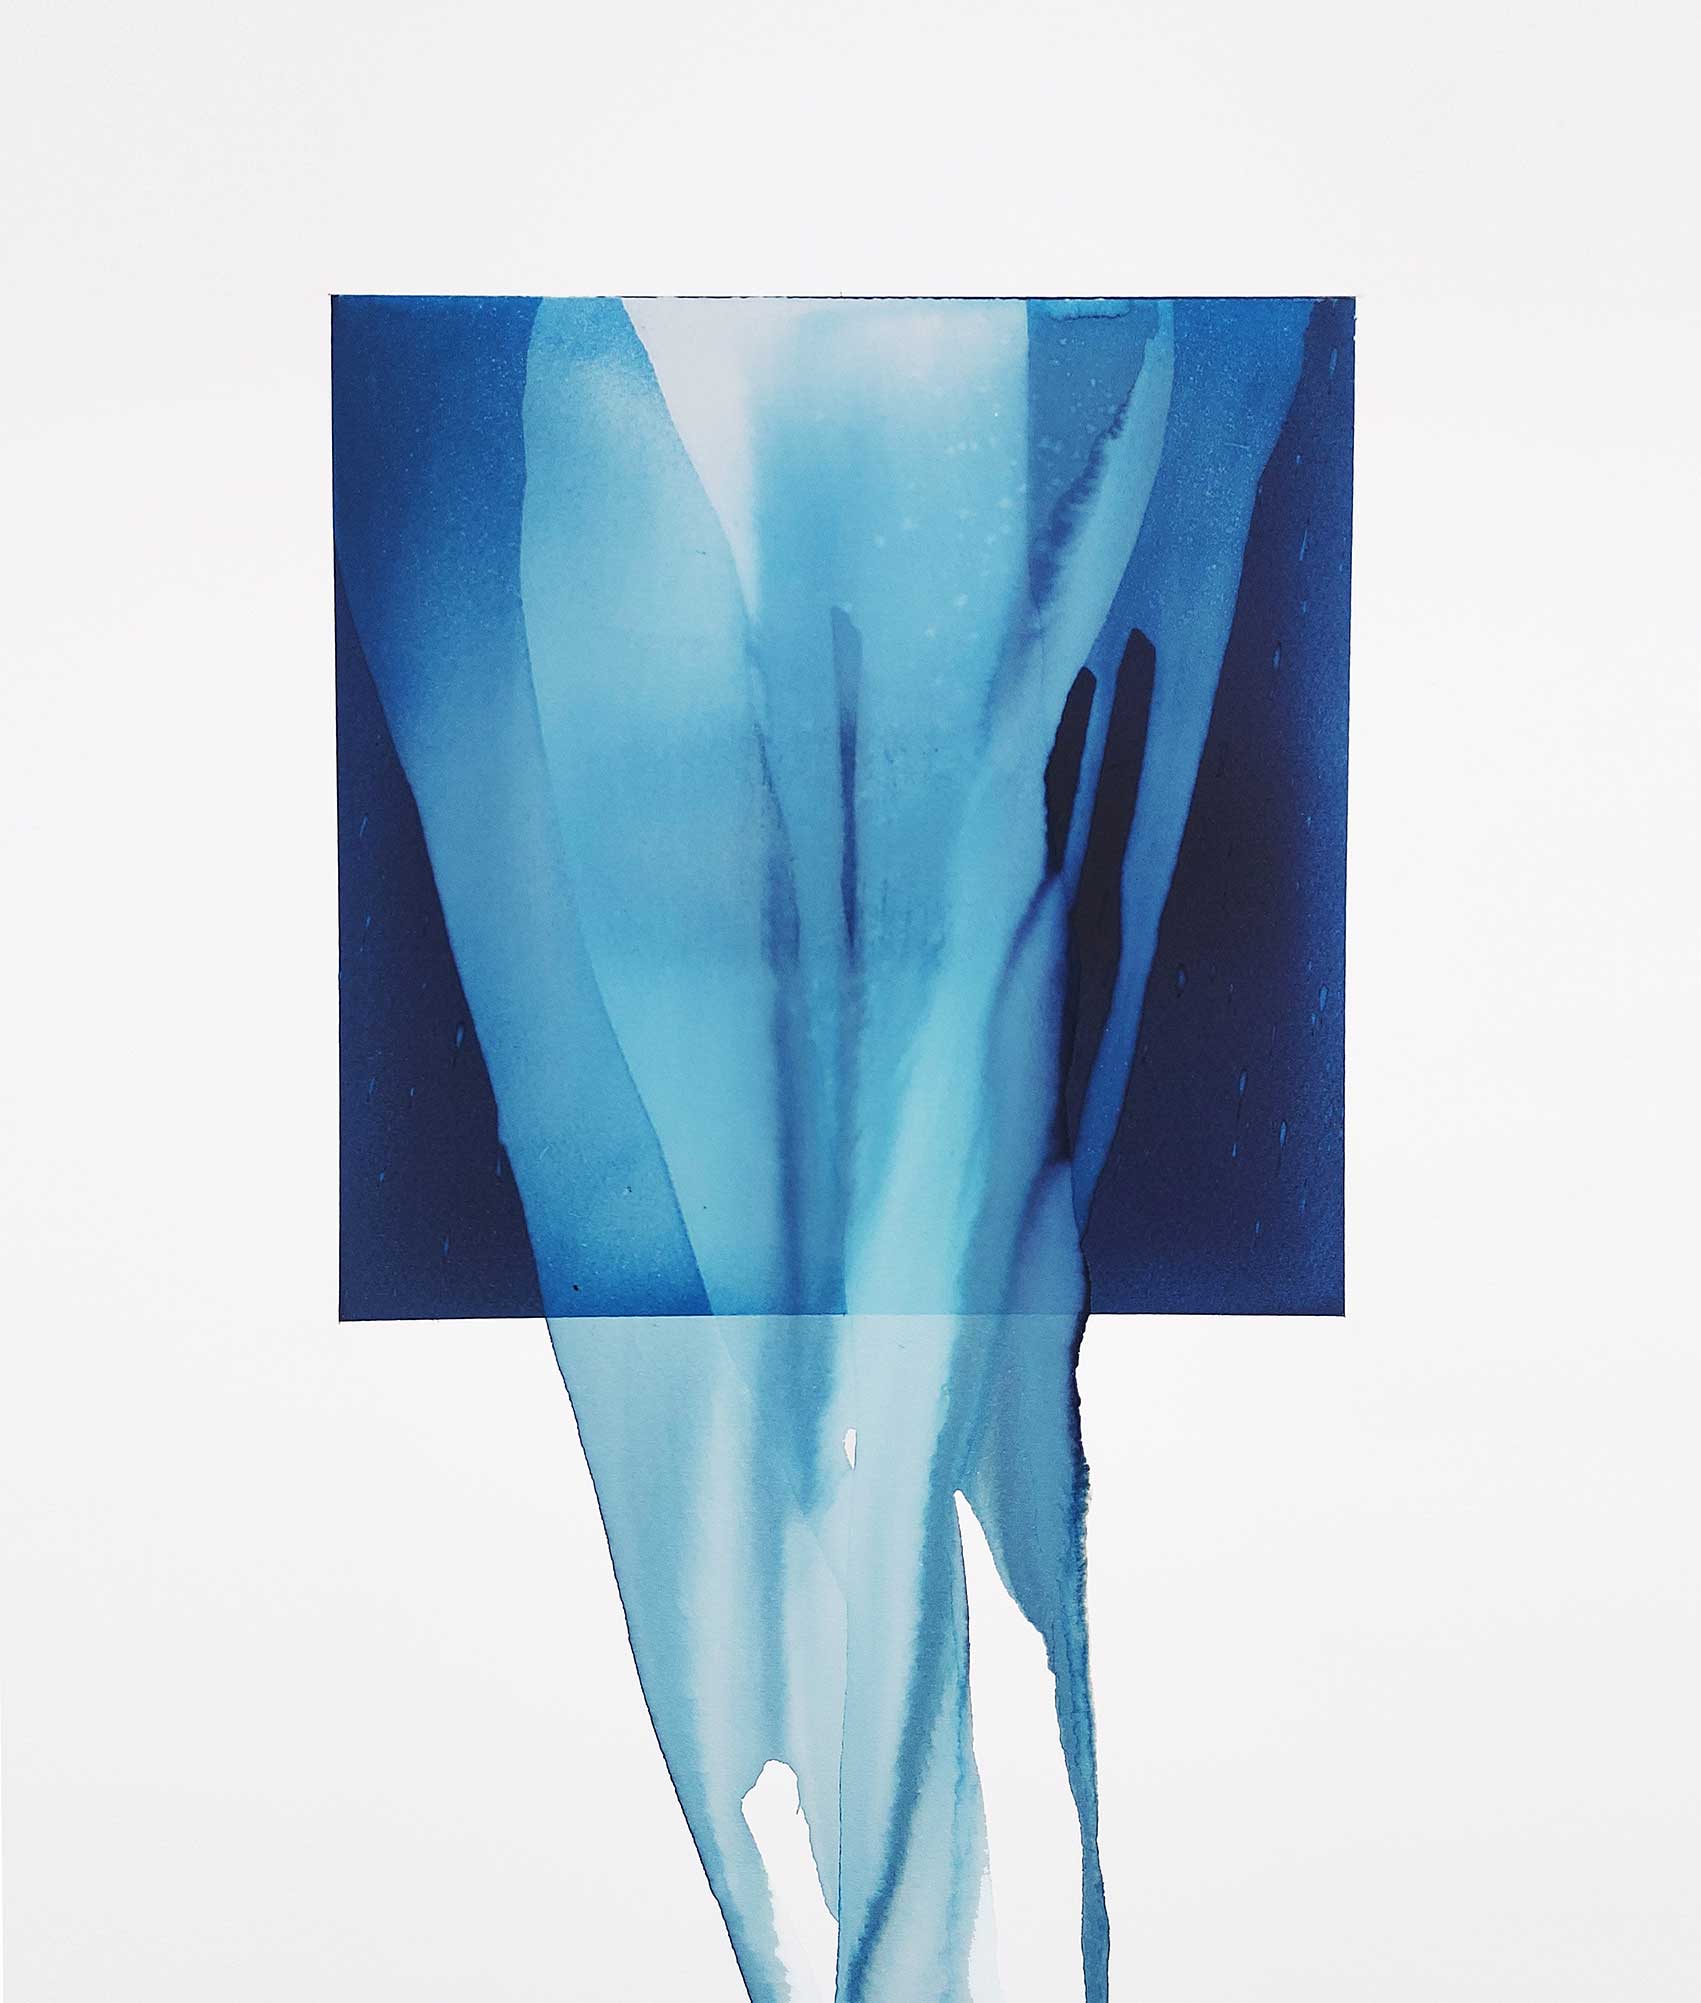 Overflow II by Paula Hickey. Art piece showing blue ink dripping from a central square surrounded by white space.